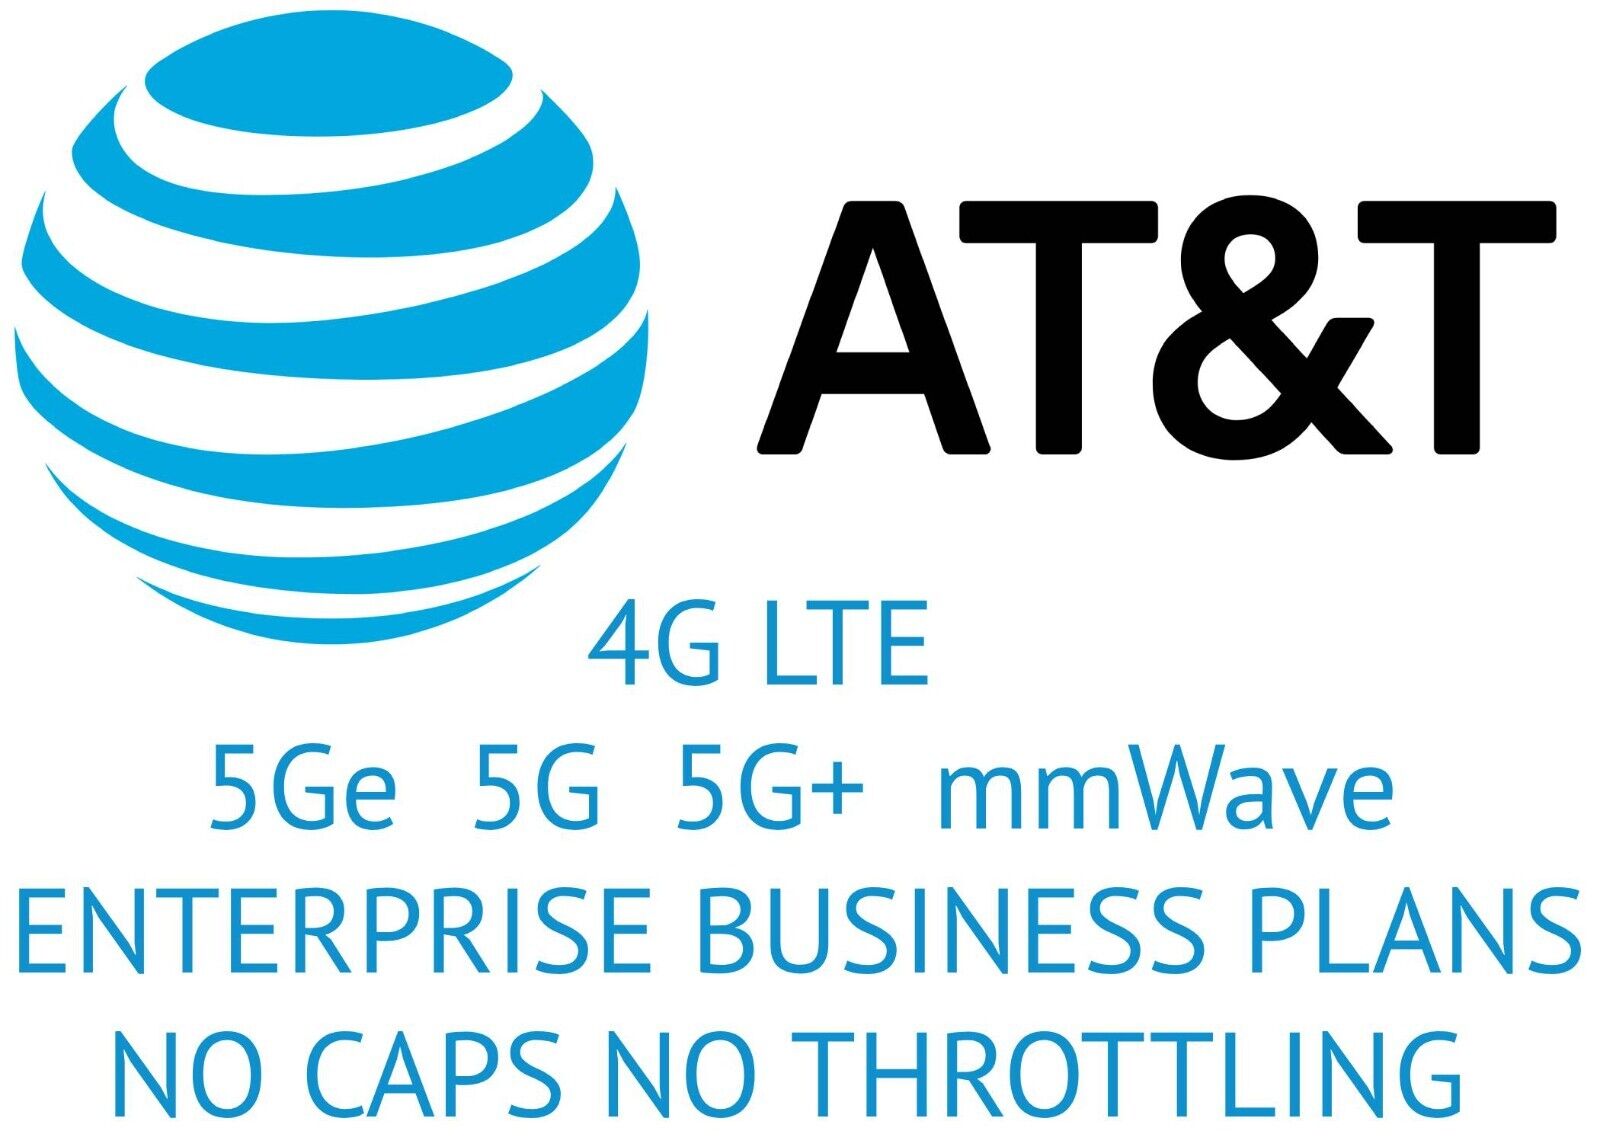 AT&T UNLIMITED DATA 4G LTE 5G RV's INTERNET HOME BUSINESS PLAN RENTAL